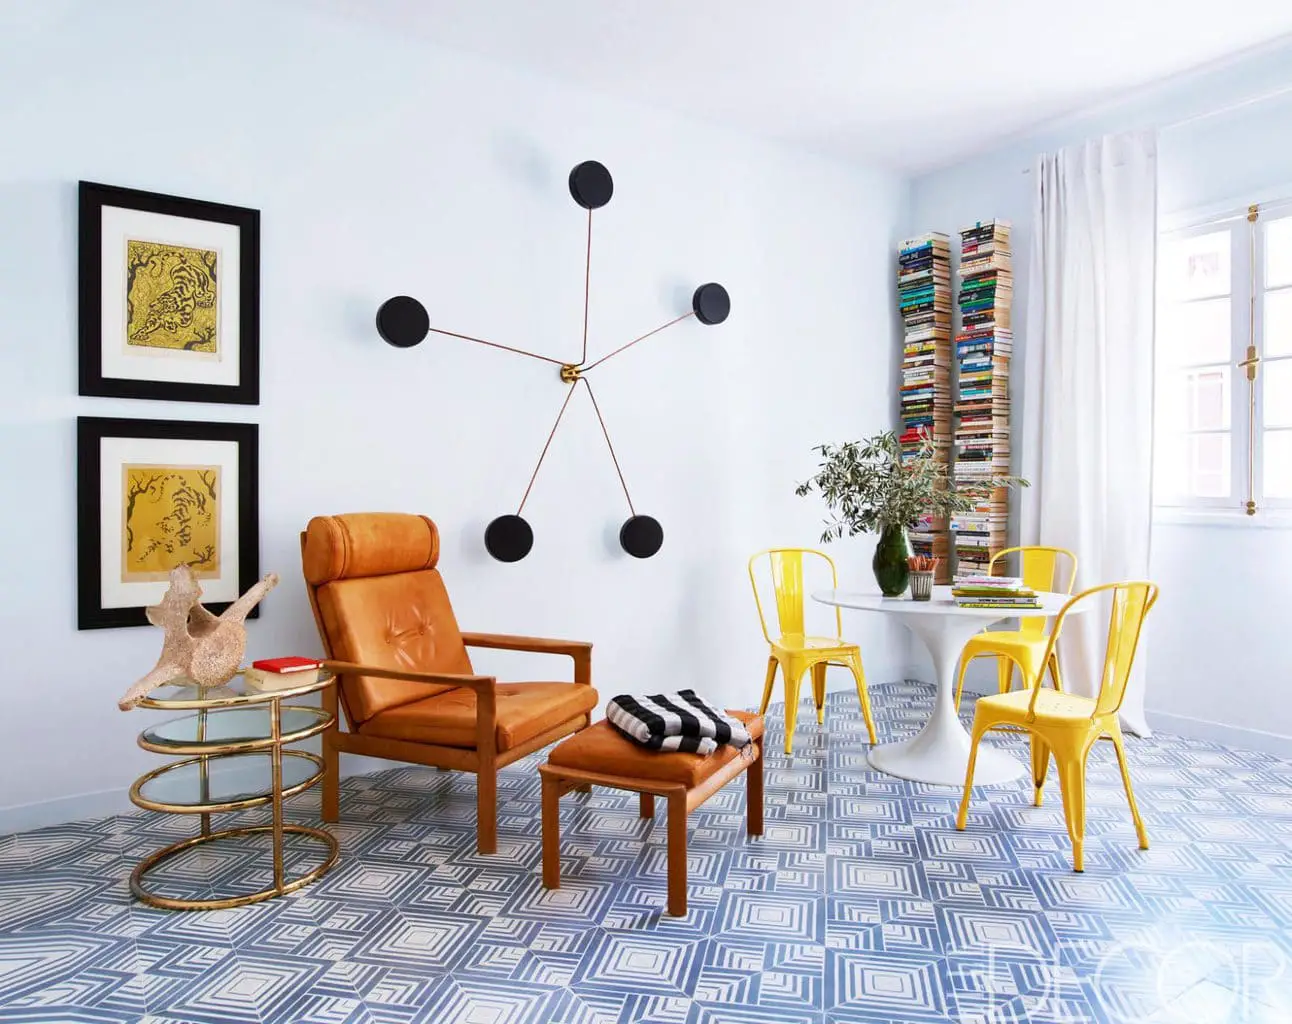 Bright playful living room at home with Moroccan tile designers.